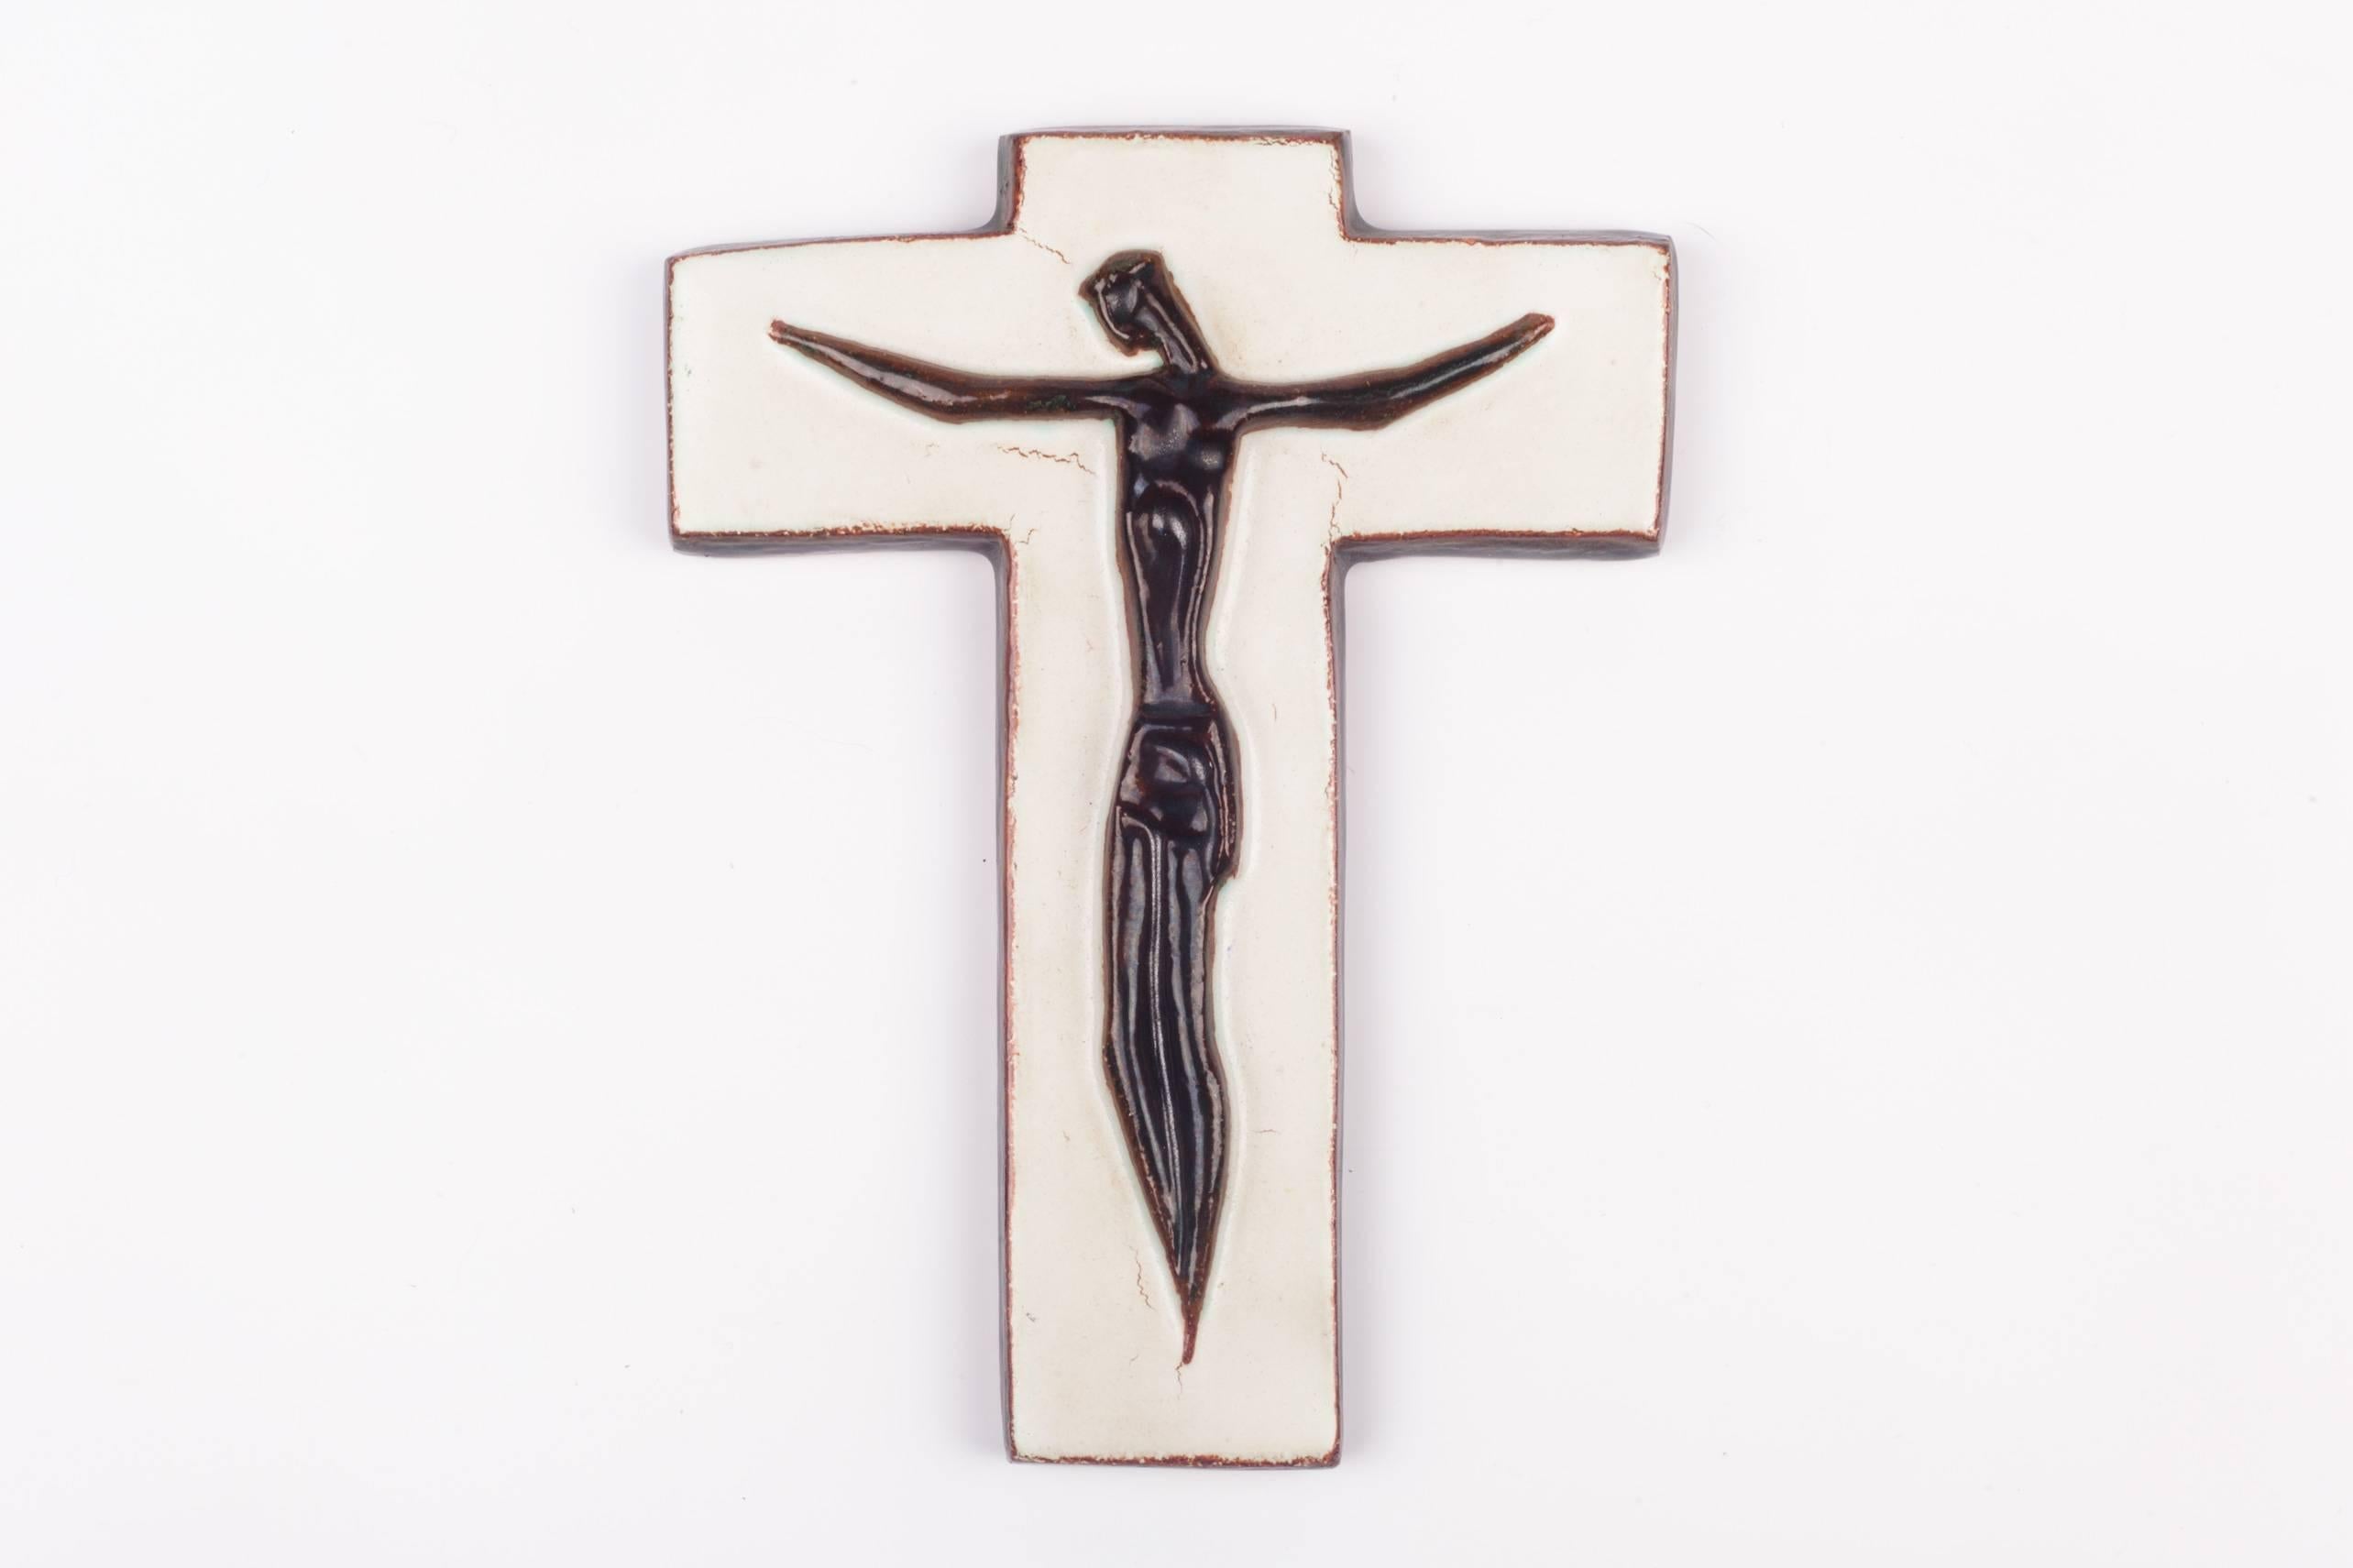 Glazed Wall Crucifix, Ceramic, Hand-Painted, White, Brown, Made in Belgium, 1950s